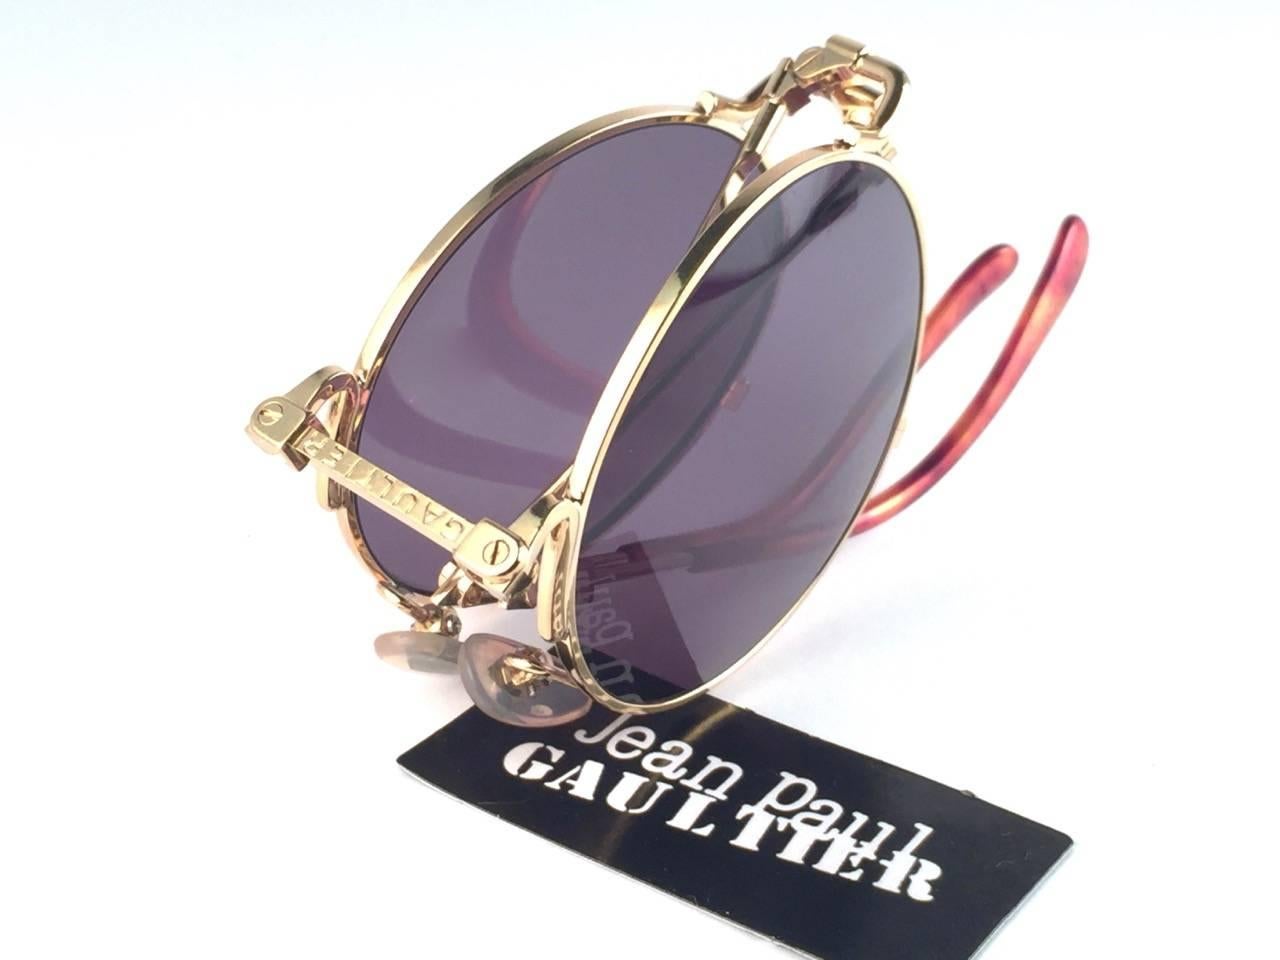 
New Jean Paul Gaultier 56 9171 Round Gold Foldable frame. 
Smoke grey lenses that complete a ready to wear JPG look.

Amazing design with strong yet intricate details.
Design and produced in the 1900's.
New, never worn or displayed.
A true fashion